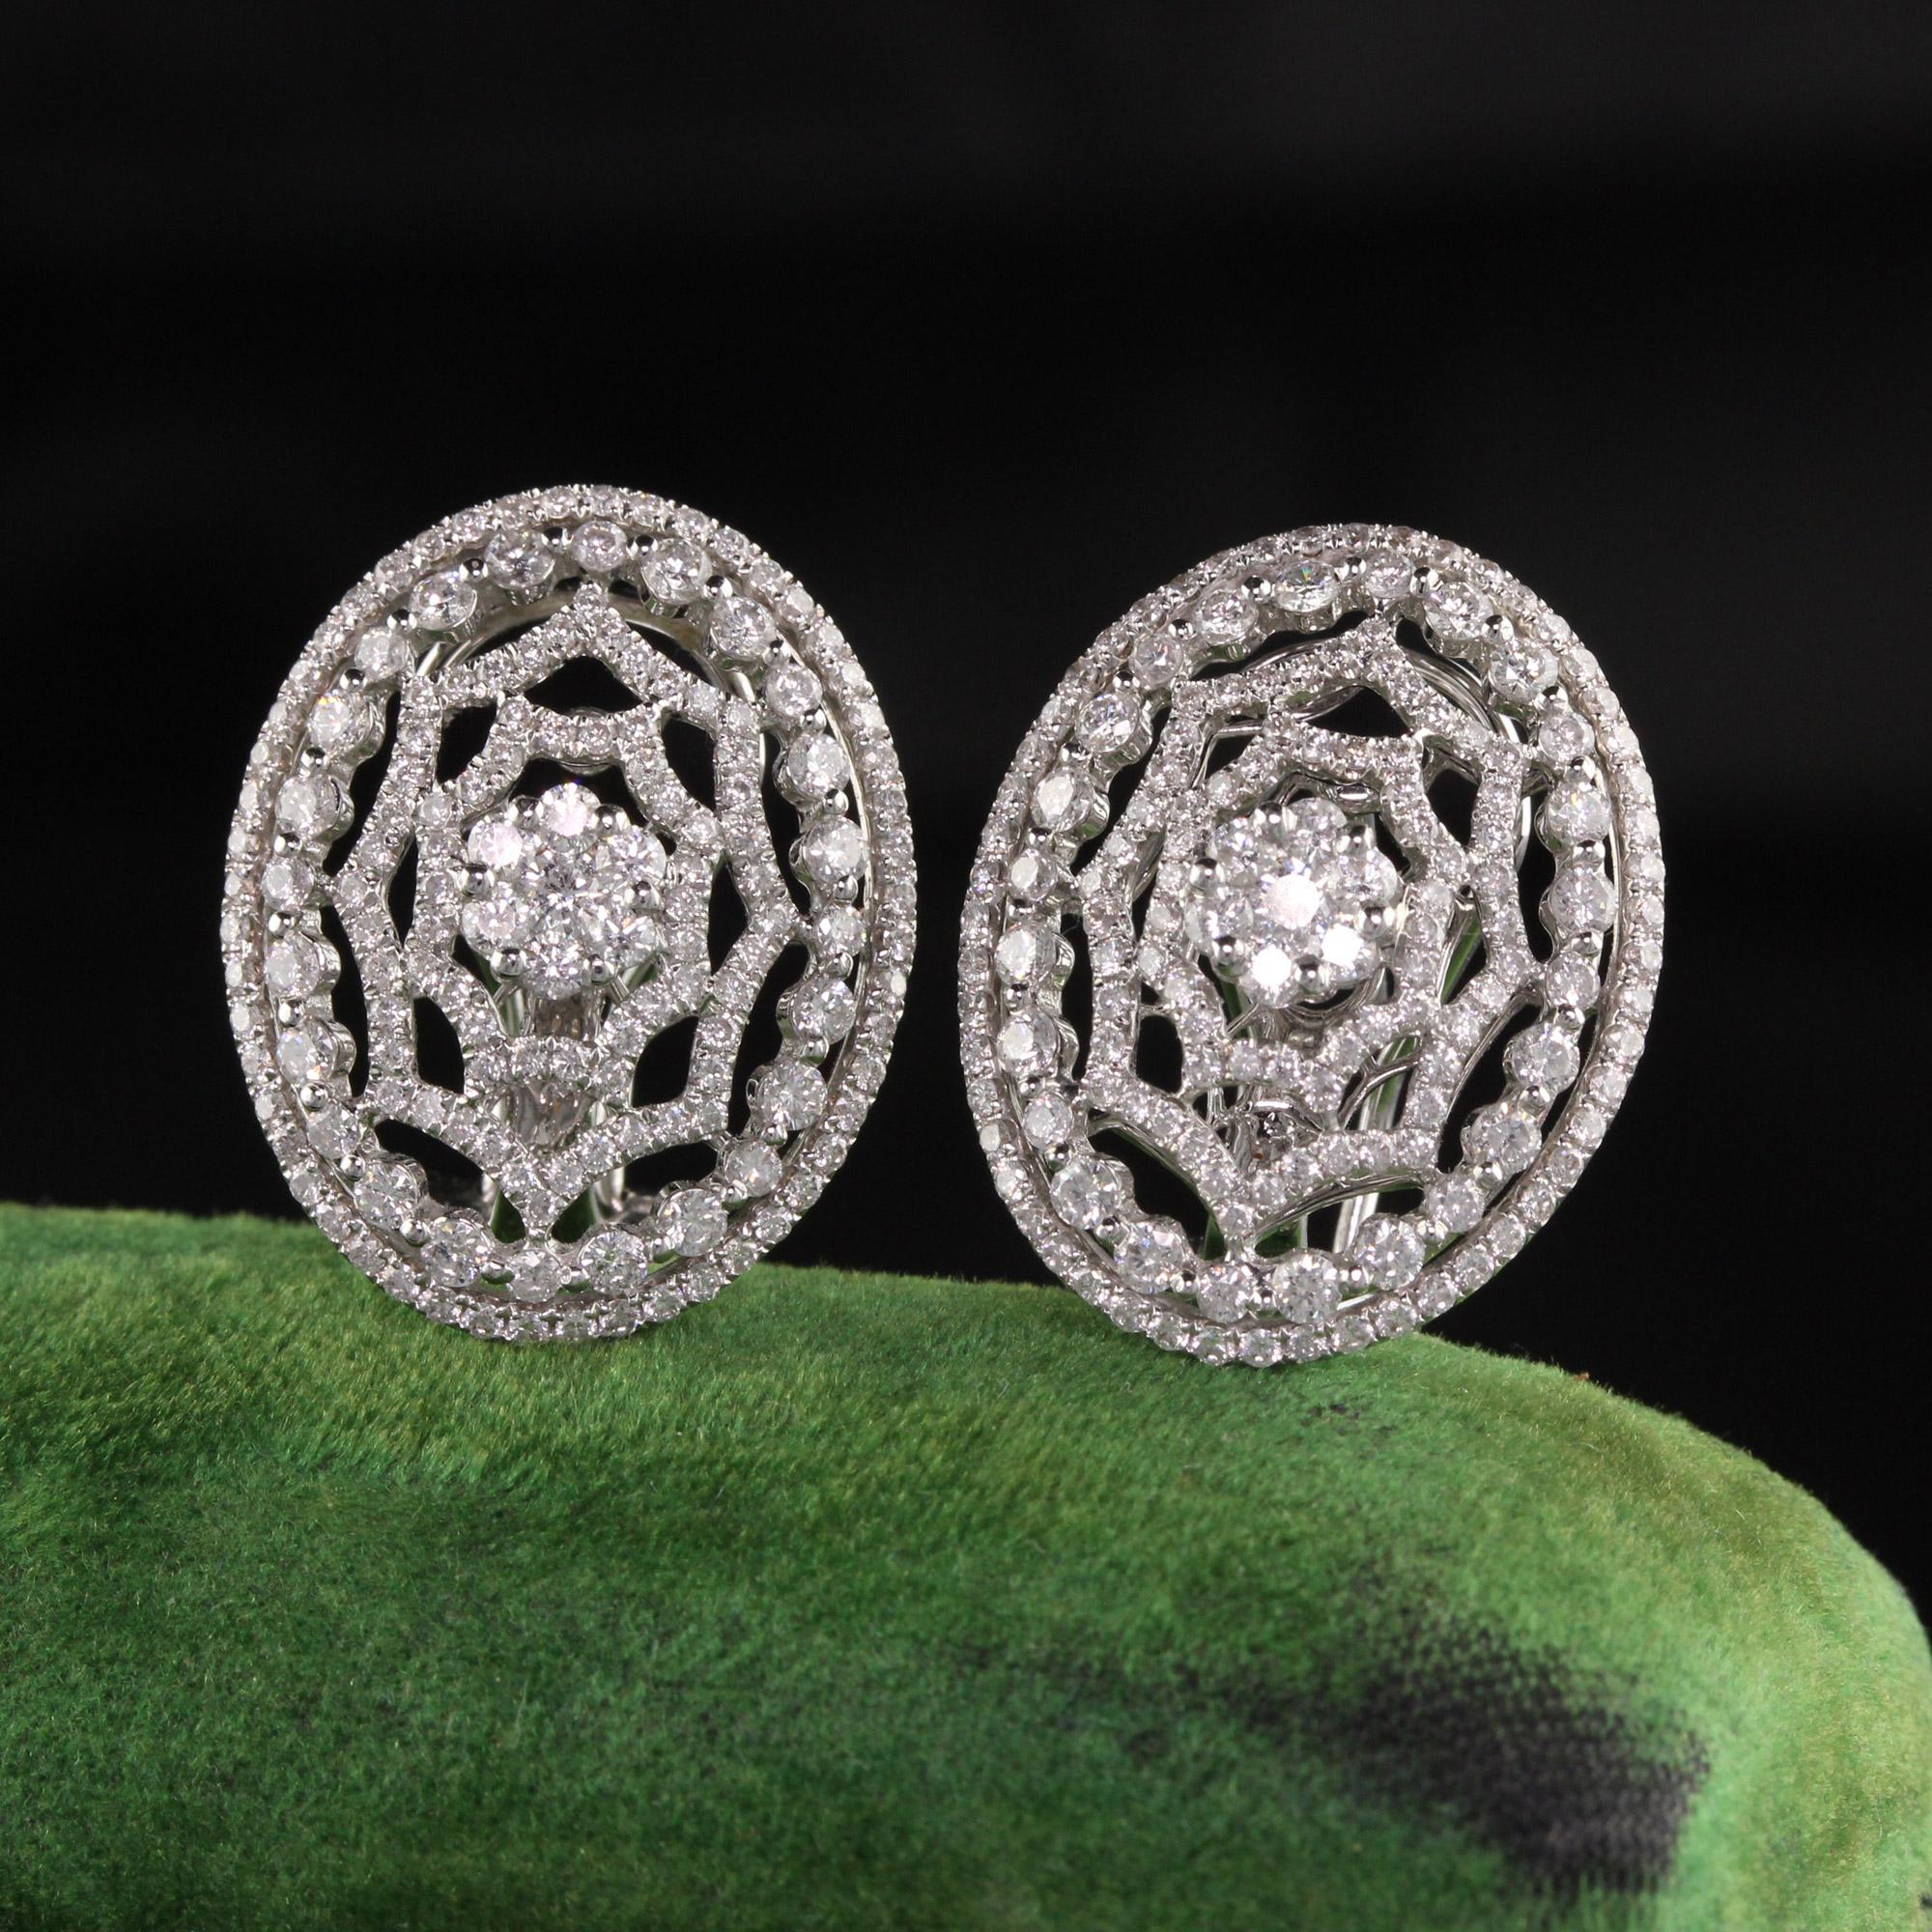 Dazzling diamond earrings with gorgeous design.

Metal: 14K White Gold

Weight: 7.3 Grams

Diamond Weight: Approximately 2 ct

Diamond Color: H

Diamond Clarity: SI1

Measurements: 0.87 x 0.69 inches